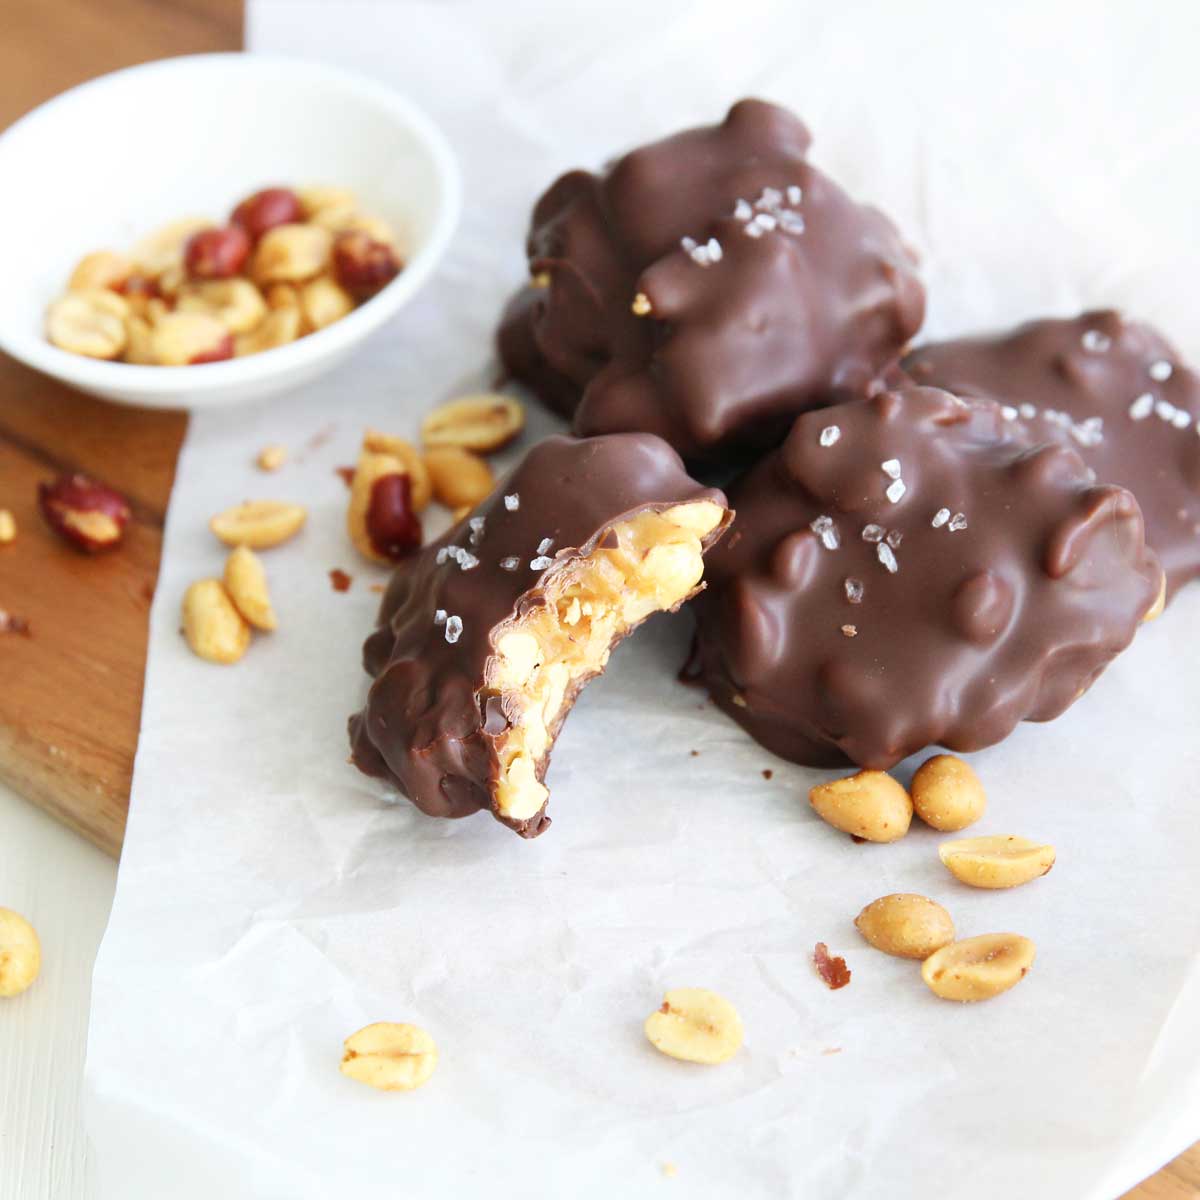 Chocolate Peanut Clusters with Collagen Caramel Filling (Easy, Keto Recipe) - Lemon Cheesecake Protein Balls